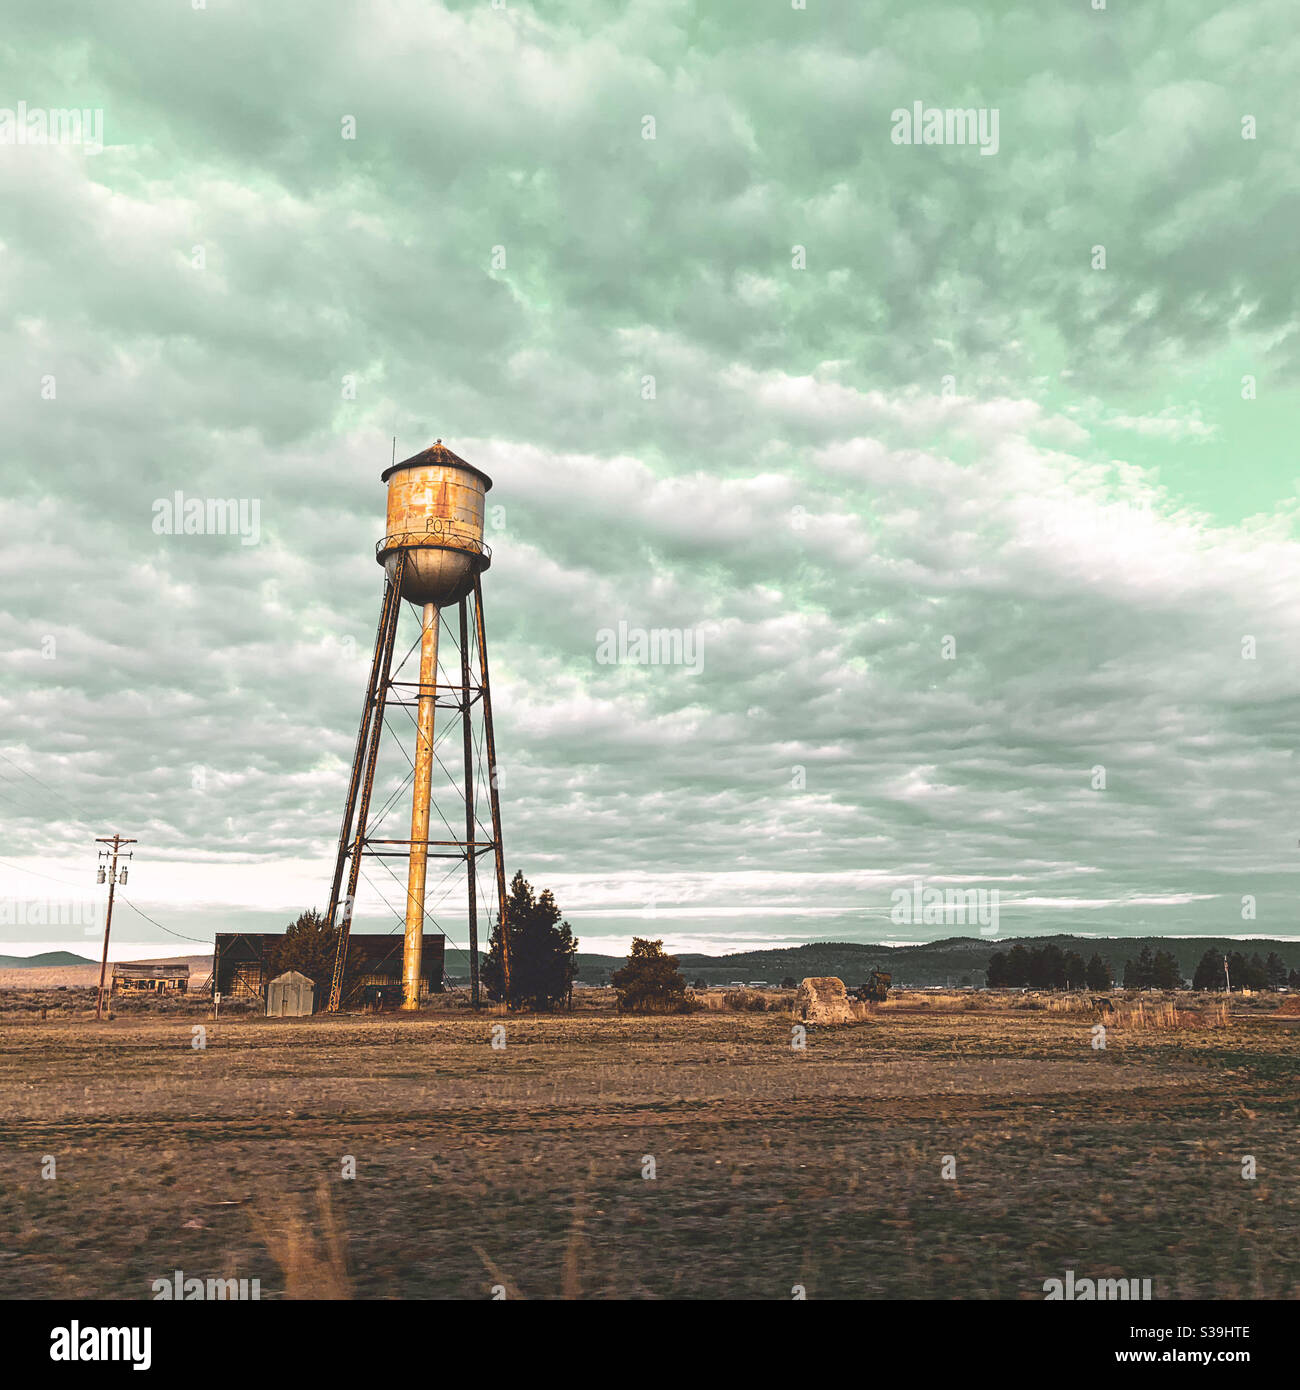 Water tower in the early morning light under a cloudy sky in California. Square crop. Stock Photo